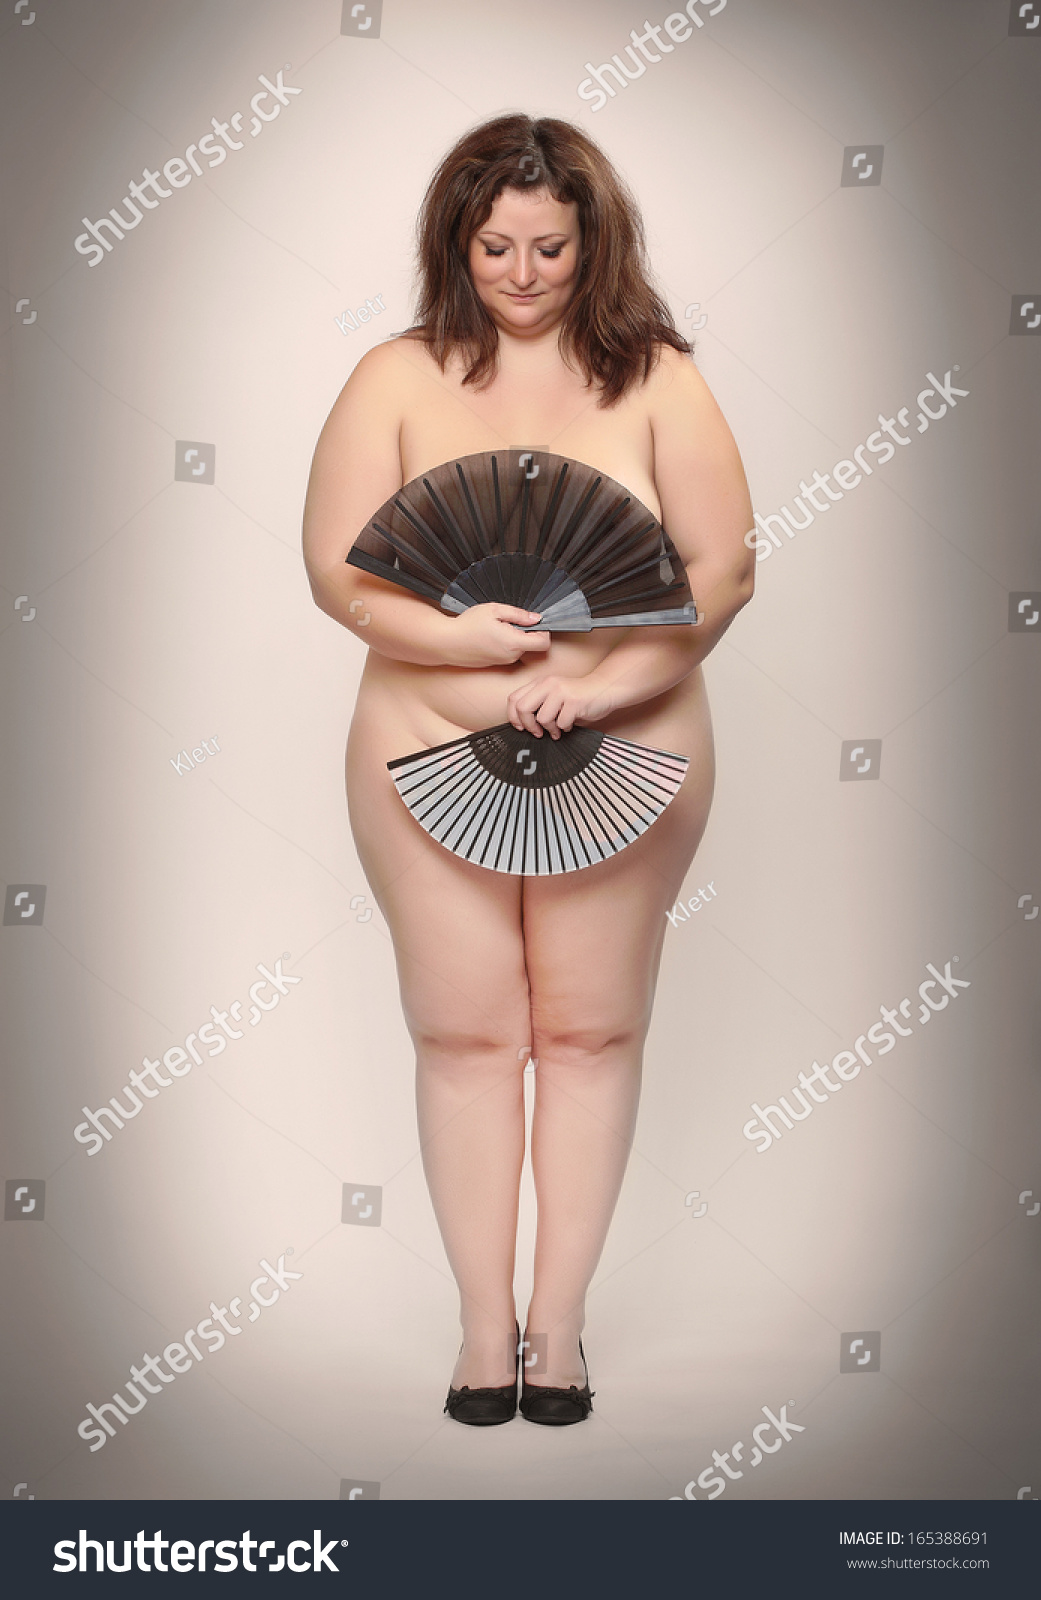 A girl that used to be overweight naked